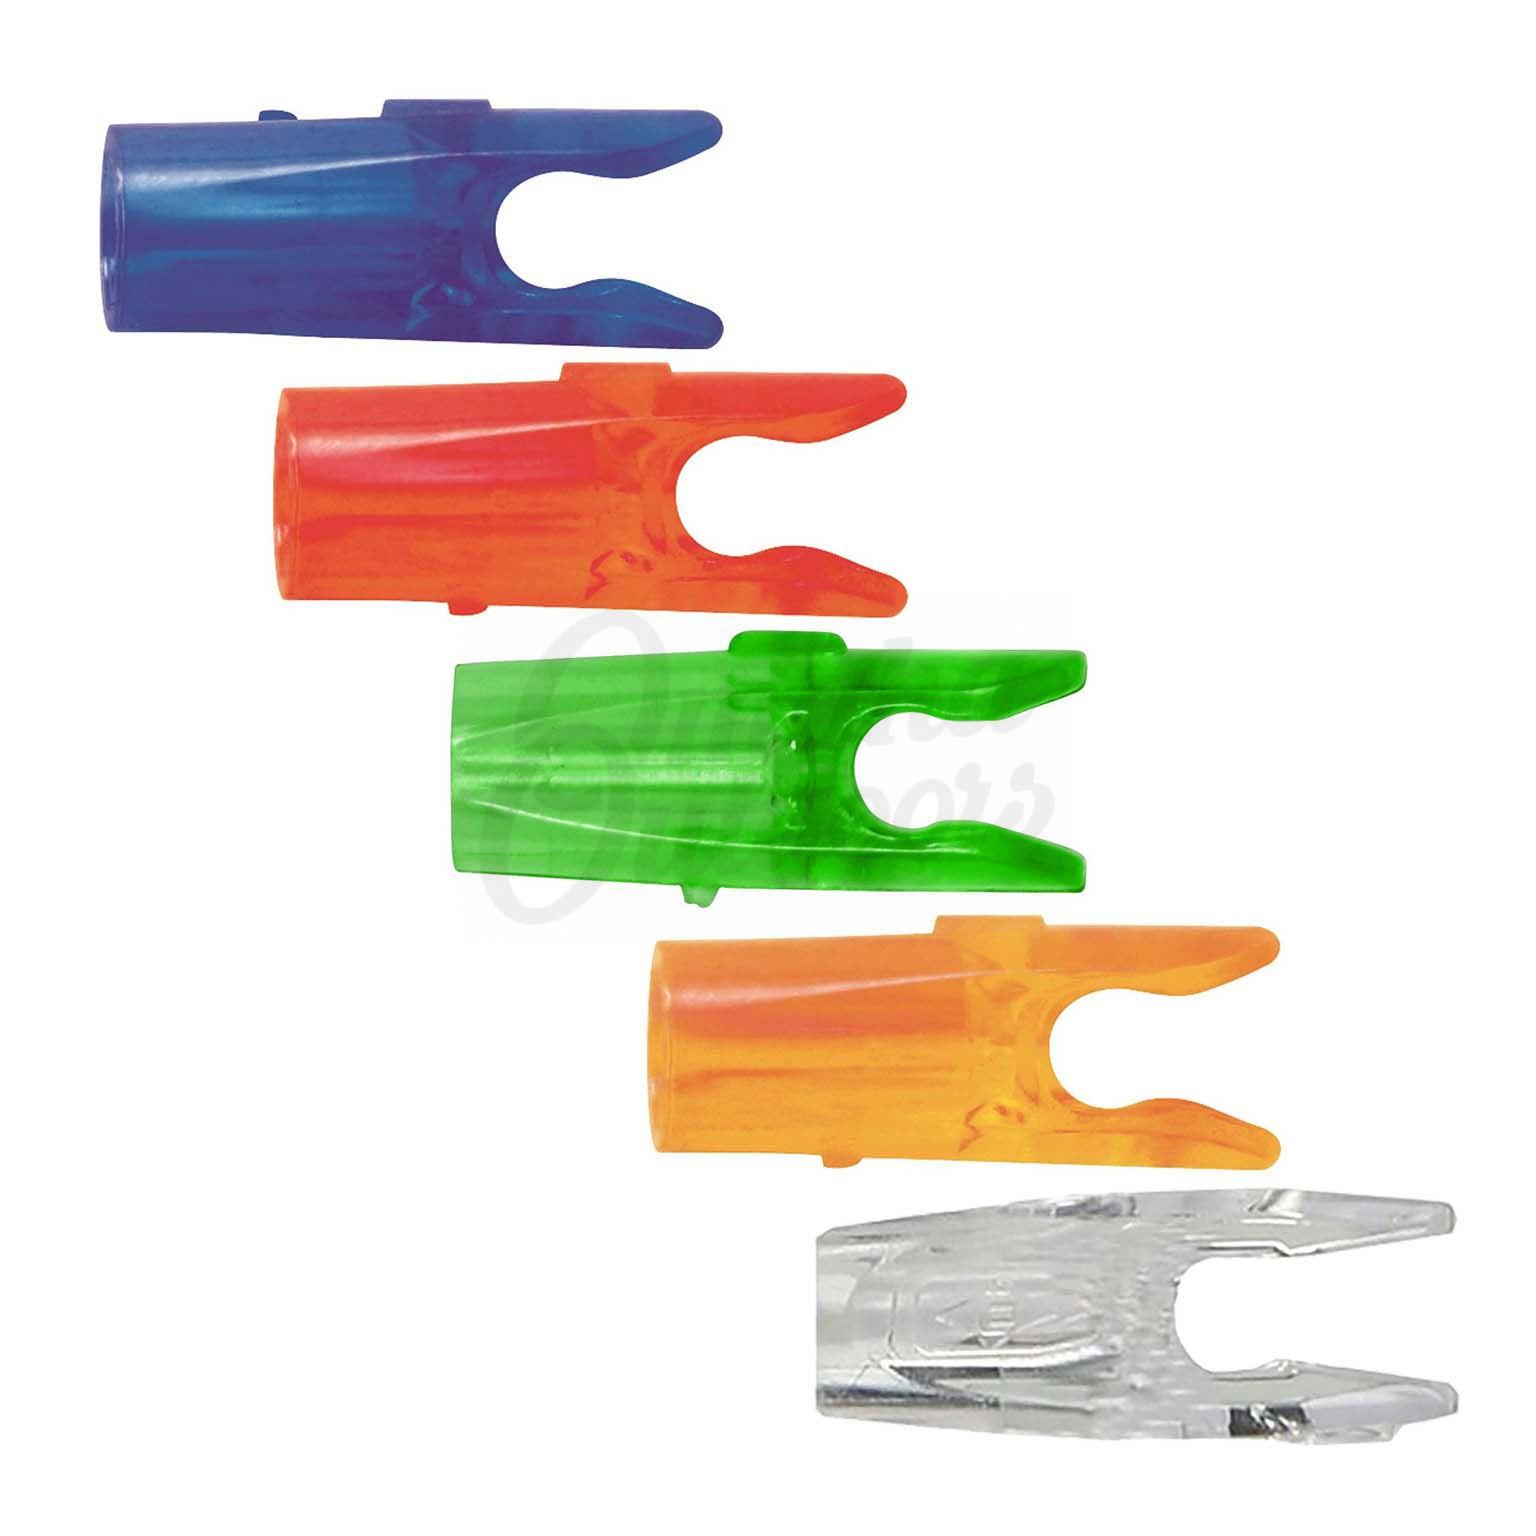 Easton Archery Pin Nocks Large Groove Pack of 12